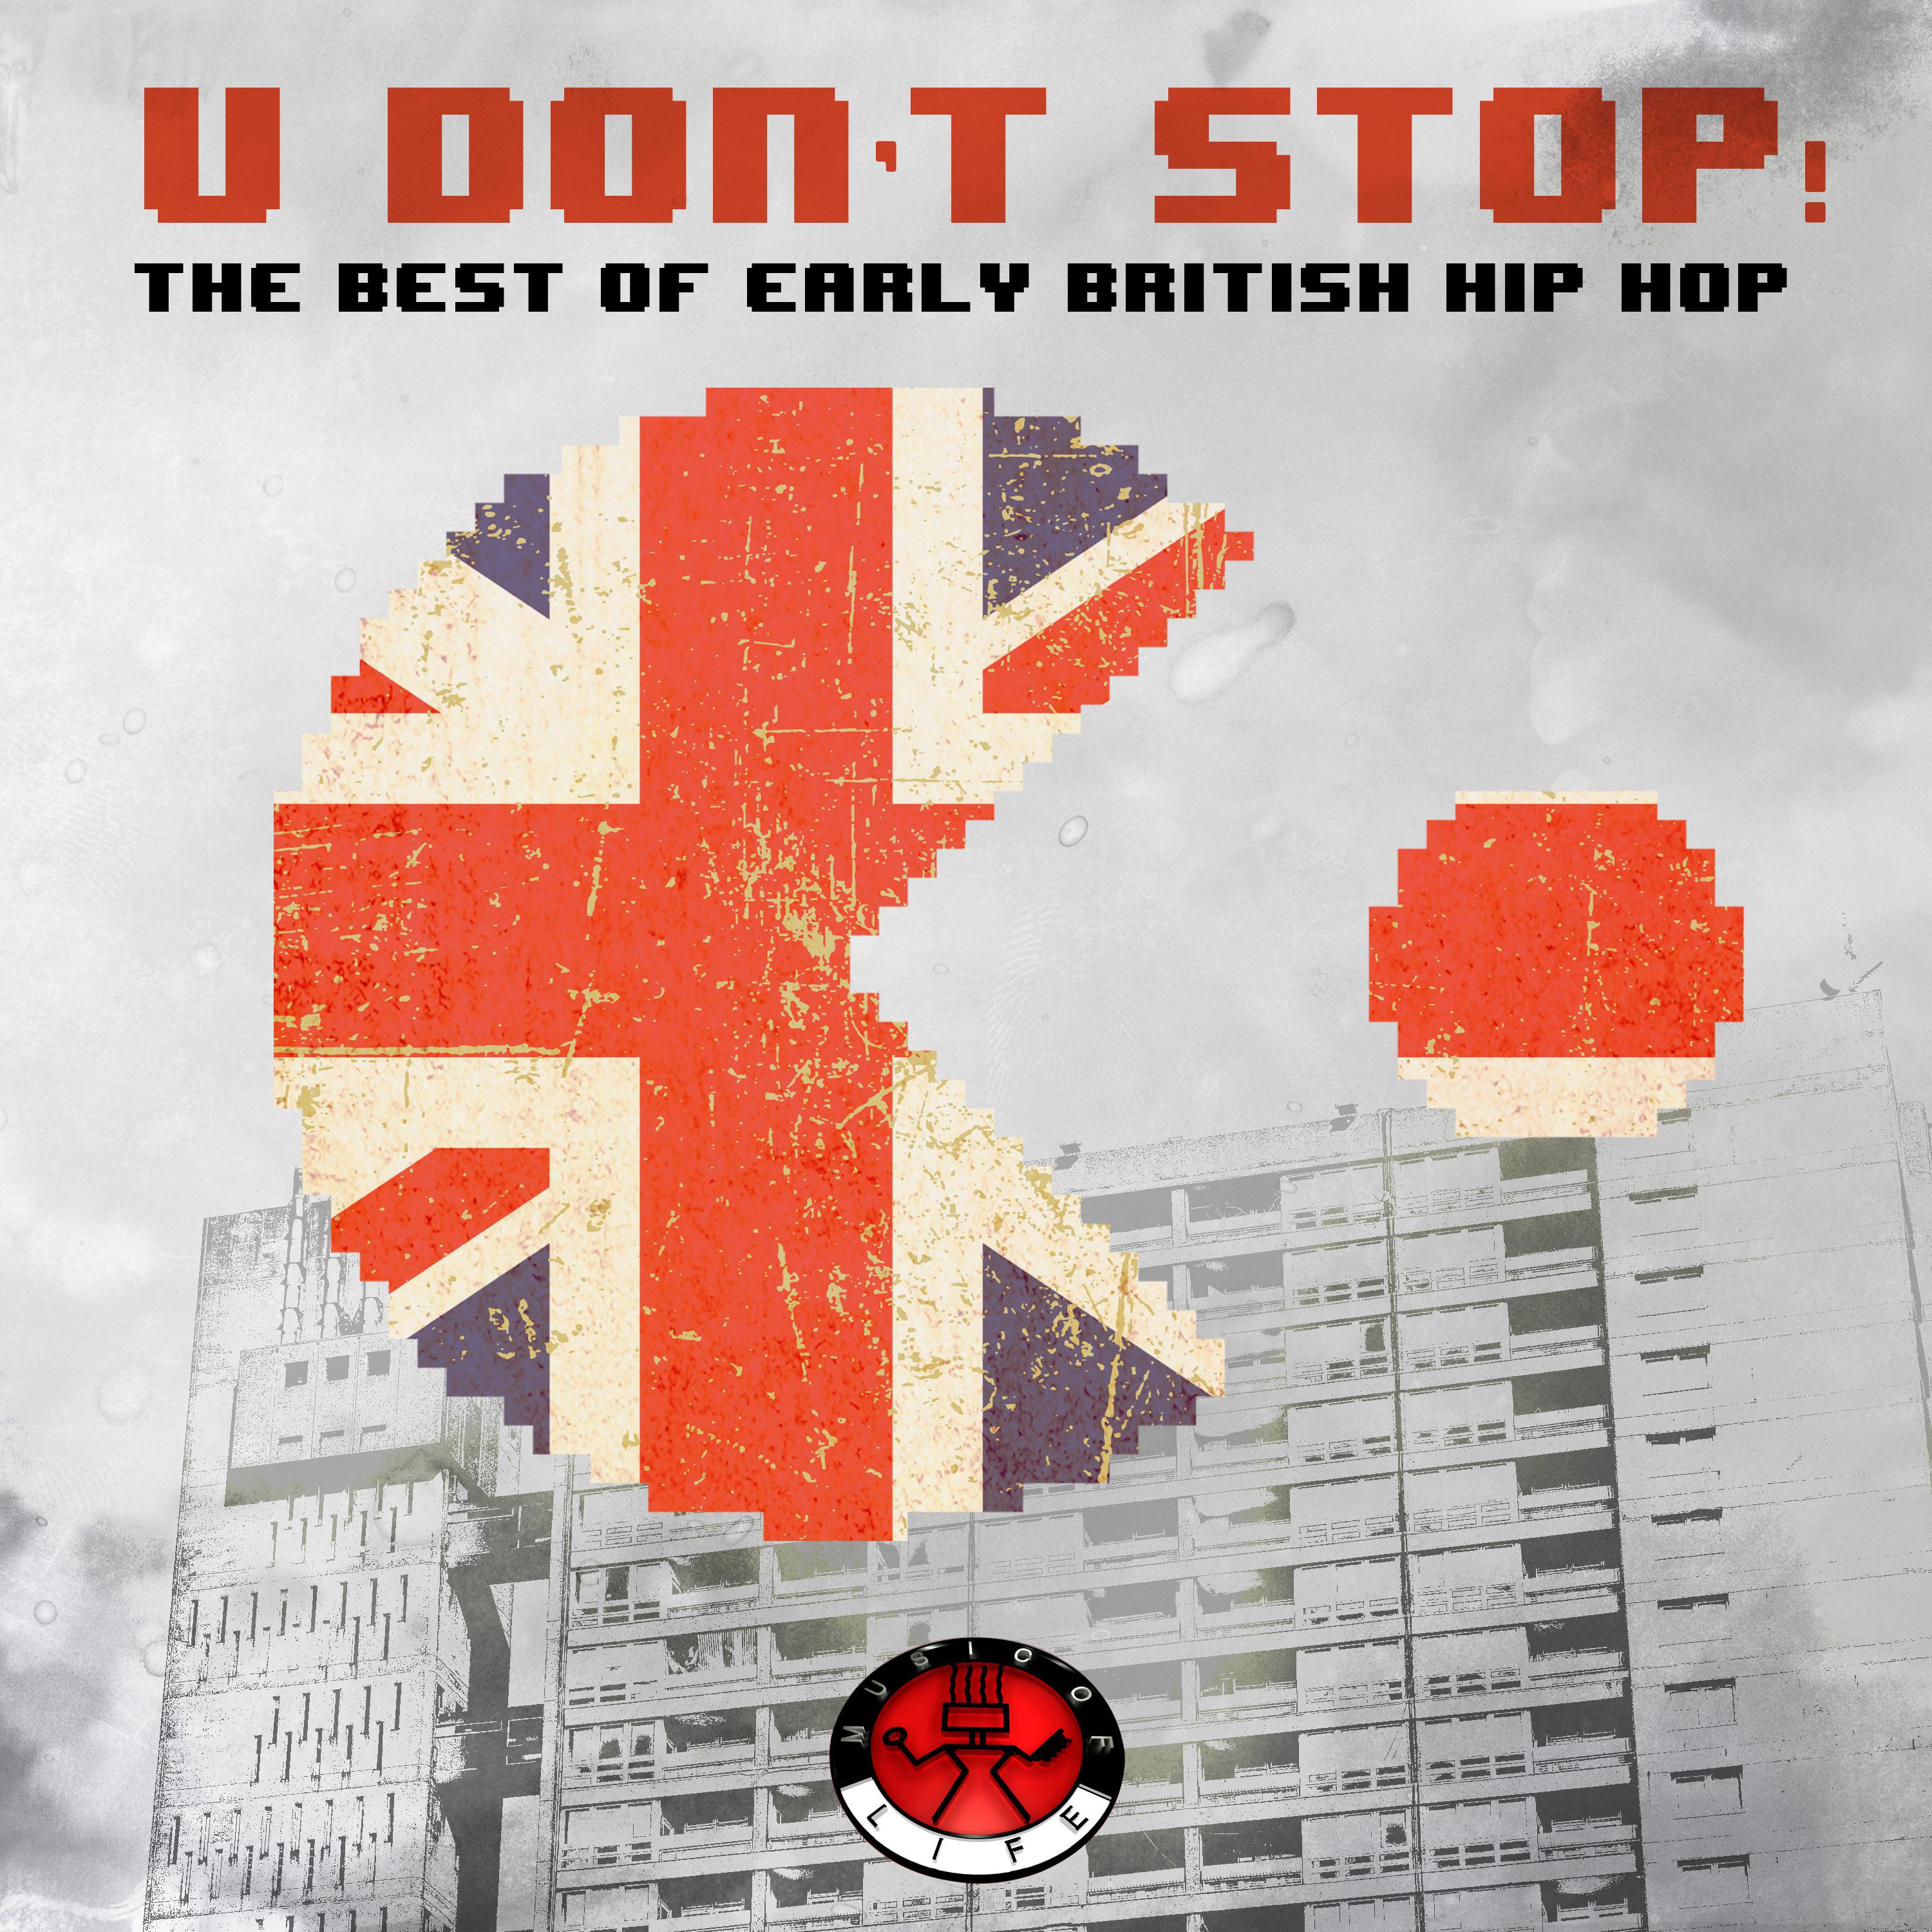 U Don' t Stop!  The Best of Early British Hip Hop